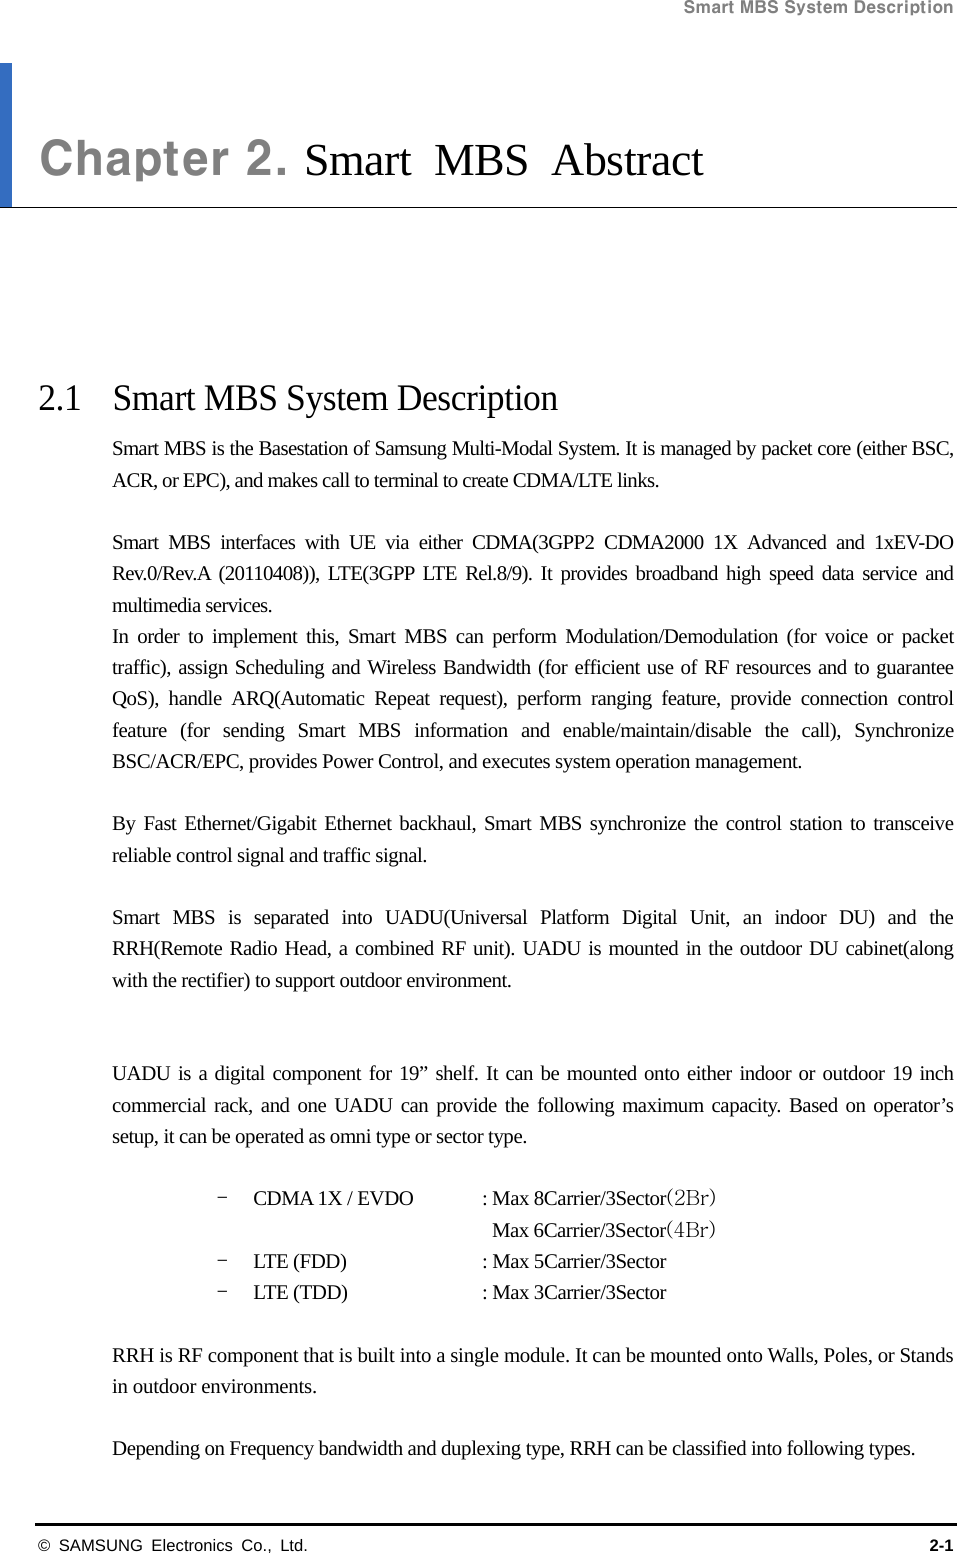 Smart MBS System Description   © SAMSUNG Electronics Co., Ltd.  2-1 Chapter 2. Smart MBS Abstract      2.1  Smart MBS System Description Smart MBS is the Basestation of Samsung Multi-Modal System. It is managed by packet core (either BSC, ACR, or EPC), and makes call to terminal to create CDMA/LTE links.  Smart MBS interfaces with UE via either CDMA(3GPP2 CDMA2000 1X Advanced and 1xEV-DO Rev.0/Rev.A (20110408)), LTE(3GPP LTE Rel.8/9). It provides broadband high speed data service and multimedia services.   In order to implement this, Smart MBS can perform Modulation/Demodulation (for voice or packet traffic), assign Scheduling and Wireless Bandwidth (for efficient use of RF resources and to guarantee QoS), handle ARQ(Automatic Repeat request), perform ranging feature, provide connection control feature (for sending Smart MBS information and enable/maintain/disable the call), Synchronize BSC/ACR/EPC, provides Power Control, and executes system operation management.  By Fast Ethernet/Gigabit Ethernet backhaul, Smart MBS synchronize the control station to transceive reliable control signal and traffic signal.  Smart MBS is separated into UADU(Universal Platform Digital Unit, an indoor DU) and the RRH(Remote Radio Head, a combined RF unit). UADU is mounted in the outdoor DU cabinet(along with the rectifier) to support outdoor environment.   UADU is a digital component for 19” shelf. It can be mounted onto either indoor or outdoor 19 inch commercial rack, and one UADU can provide the following maximum capacity. Based on operator’s setup, it can be operated as omni type or sector type.  - CDMA 1X / EVDO  : Max 8Carrier/3Sector(2Br) Max 6Carrier/3Sector(4Br) - LTE (FDD)    : Max 5Carrier/3Sector - LTE (TDD)    : Max 3Carrier/3Sector    RRH is RF component that is built into a single module. It can be mounted onto Walls, Poles, or Stands in outdoor environments.  Depending on Frequency bandwidth and duplexing type, RRH can be classified into following types. 